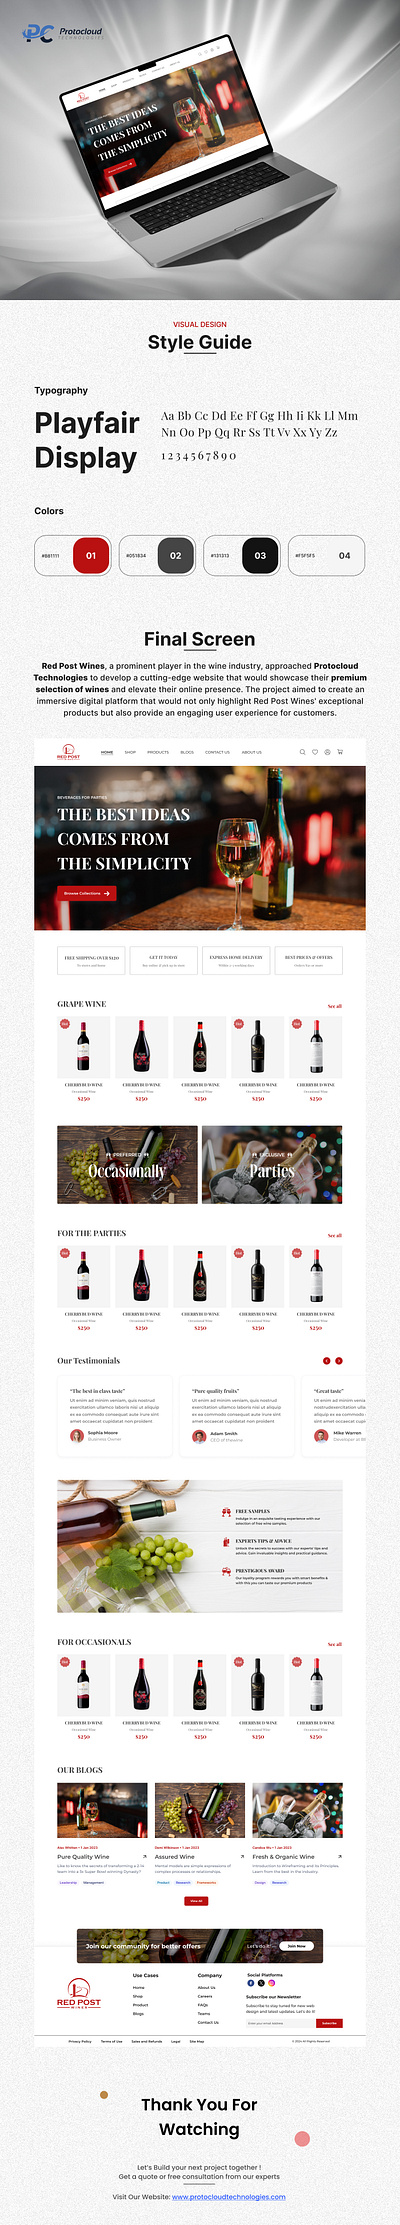 Red Post Wines Home Page: Designed by Protocloud Technologies branding company designing graphic design logo project ui uiux